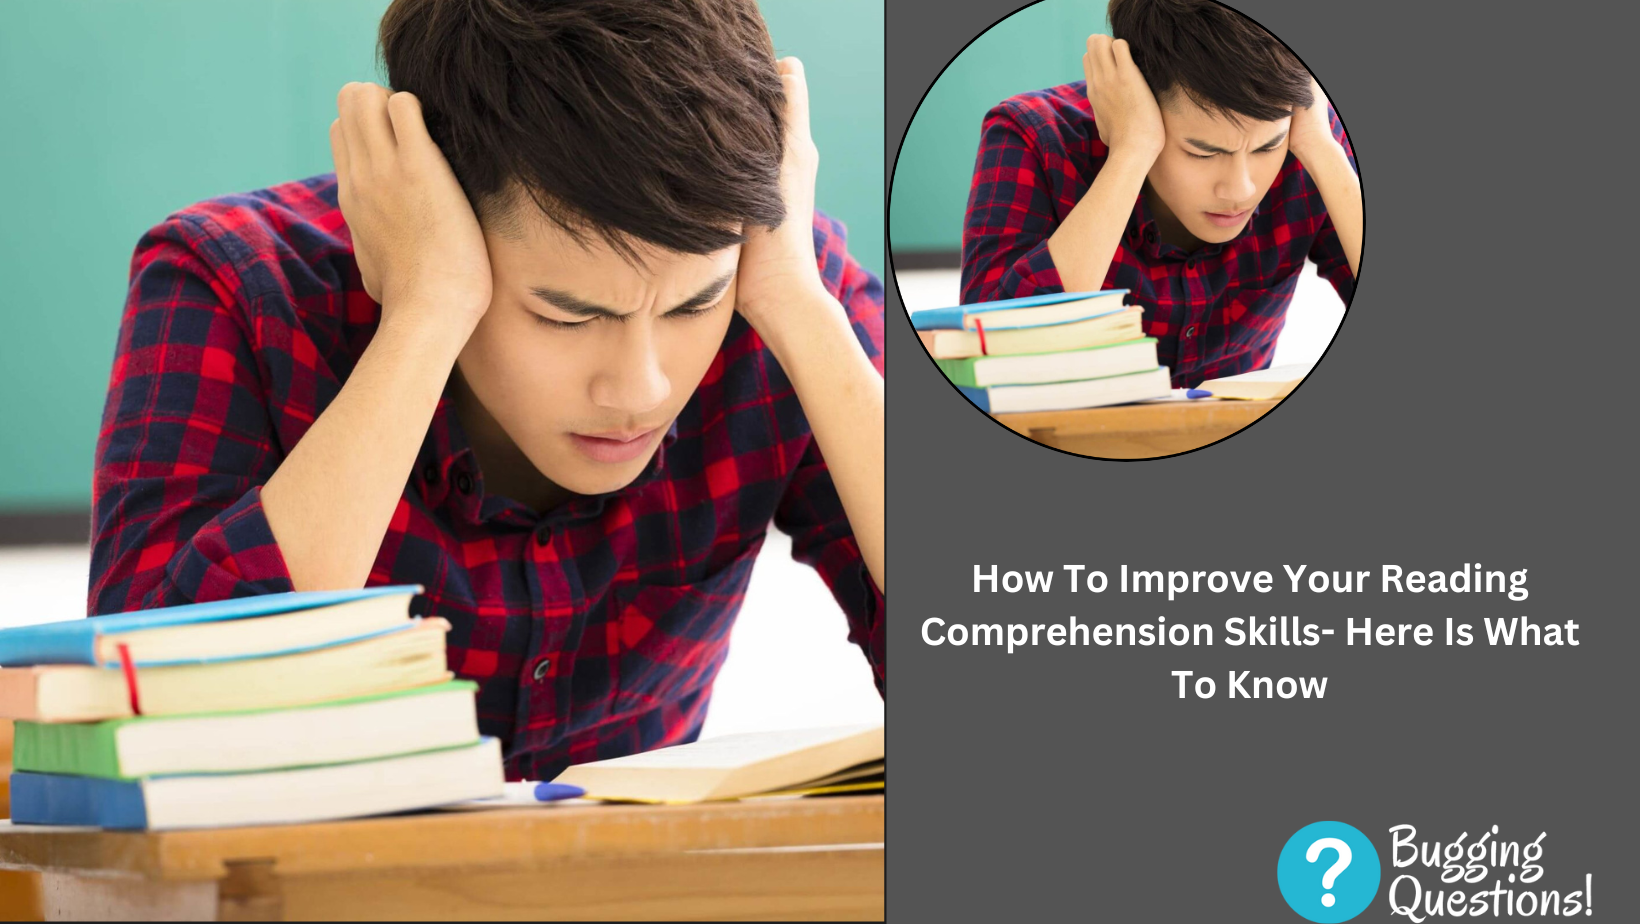 How To Improve Your Reading Comprehension Skills